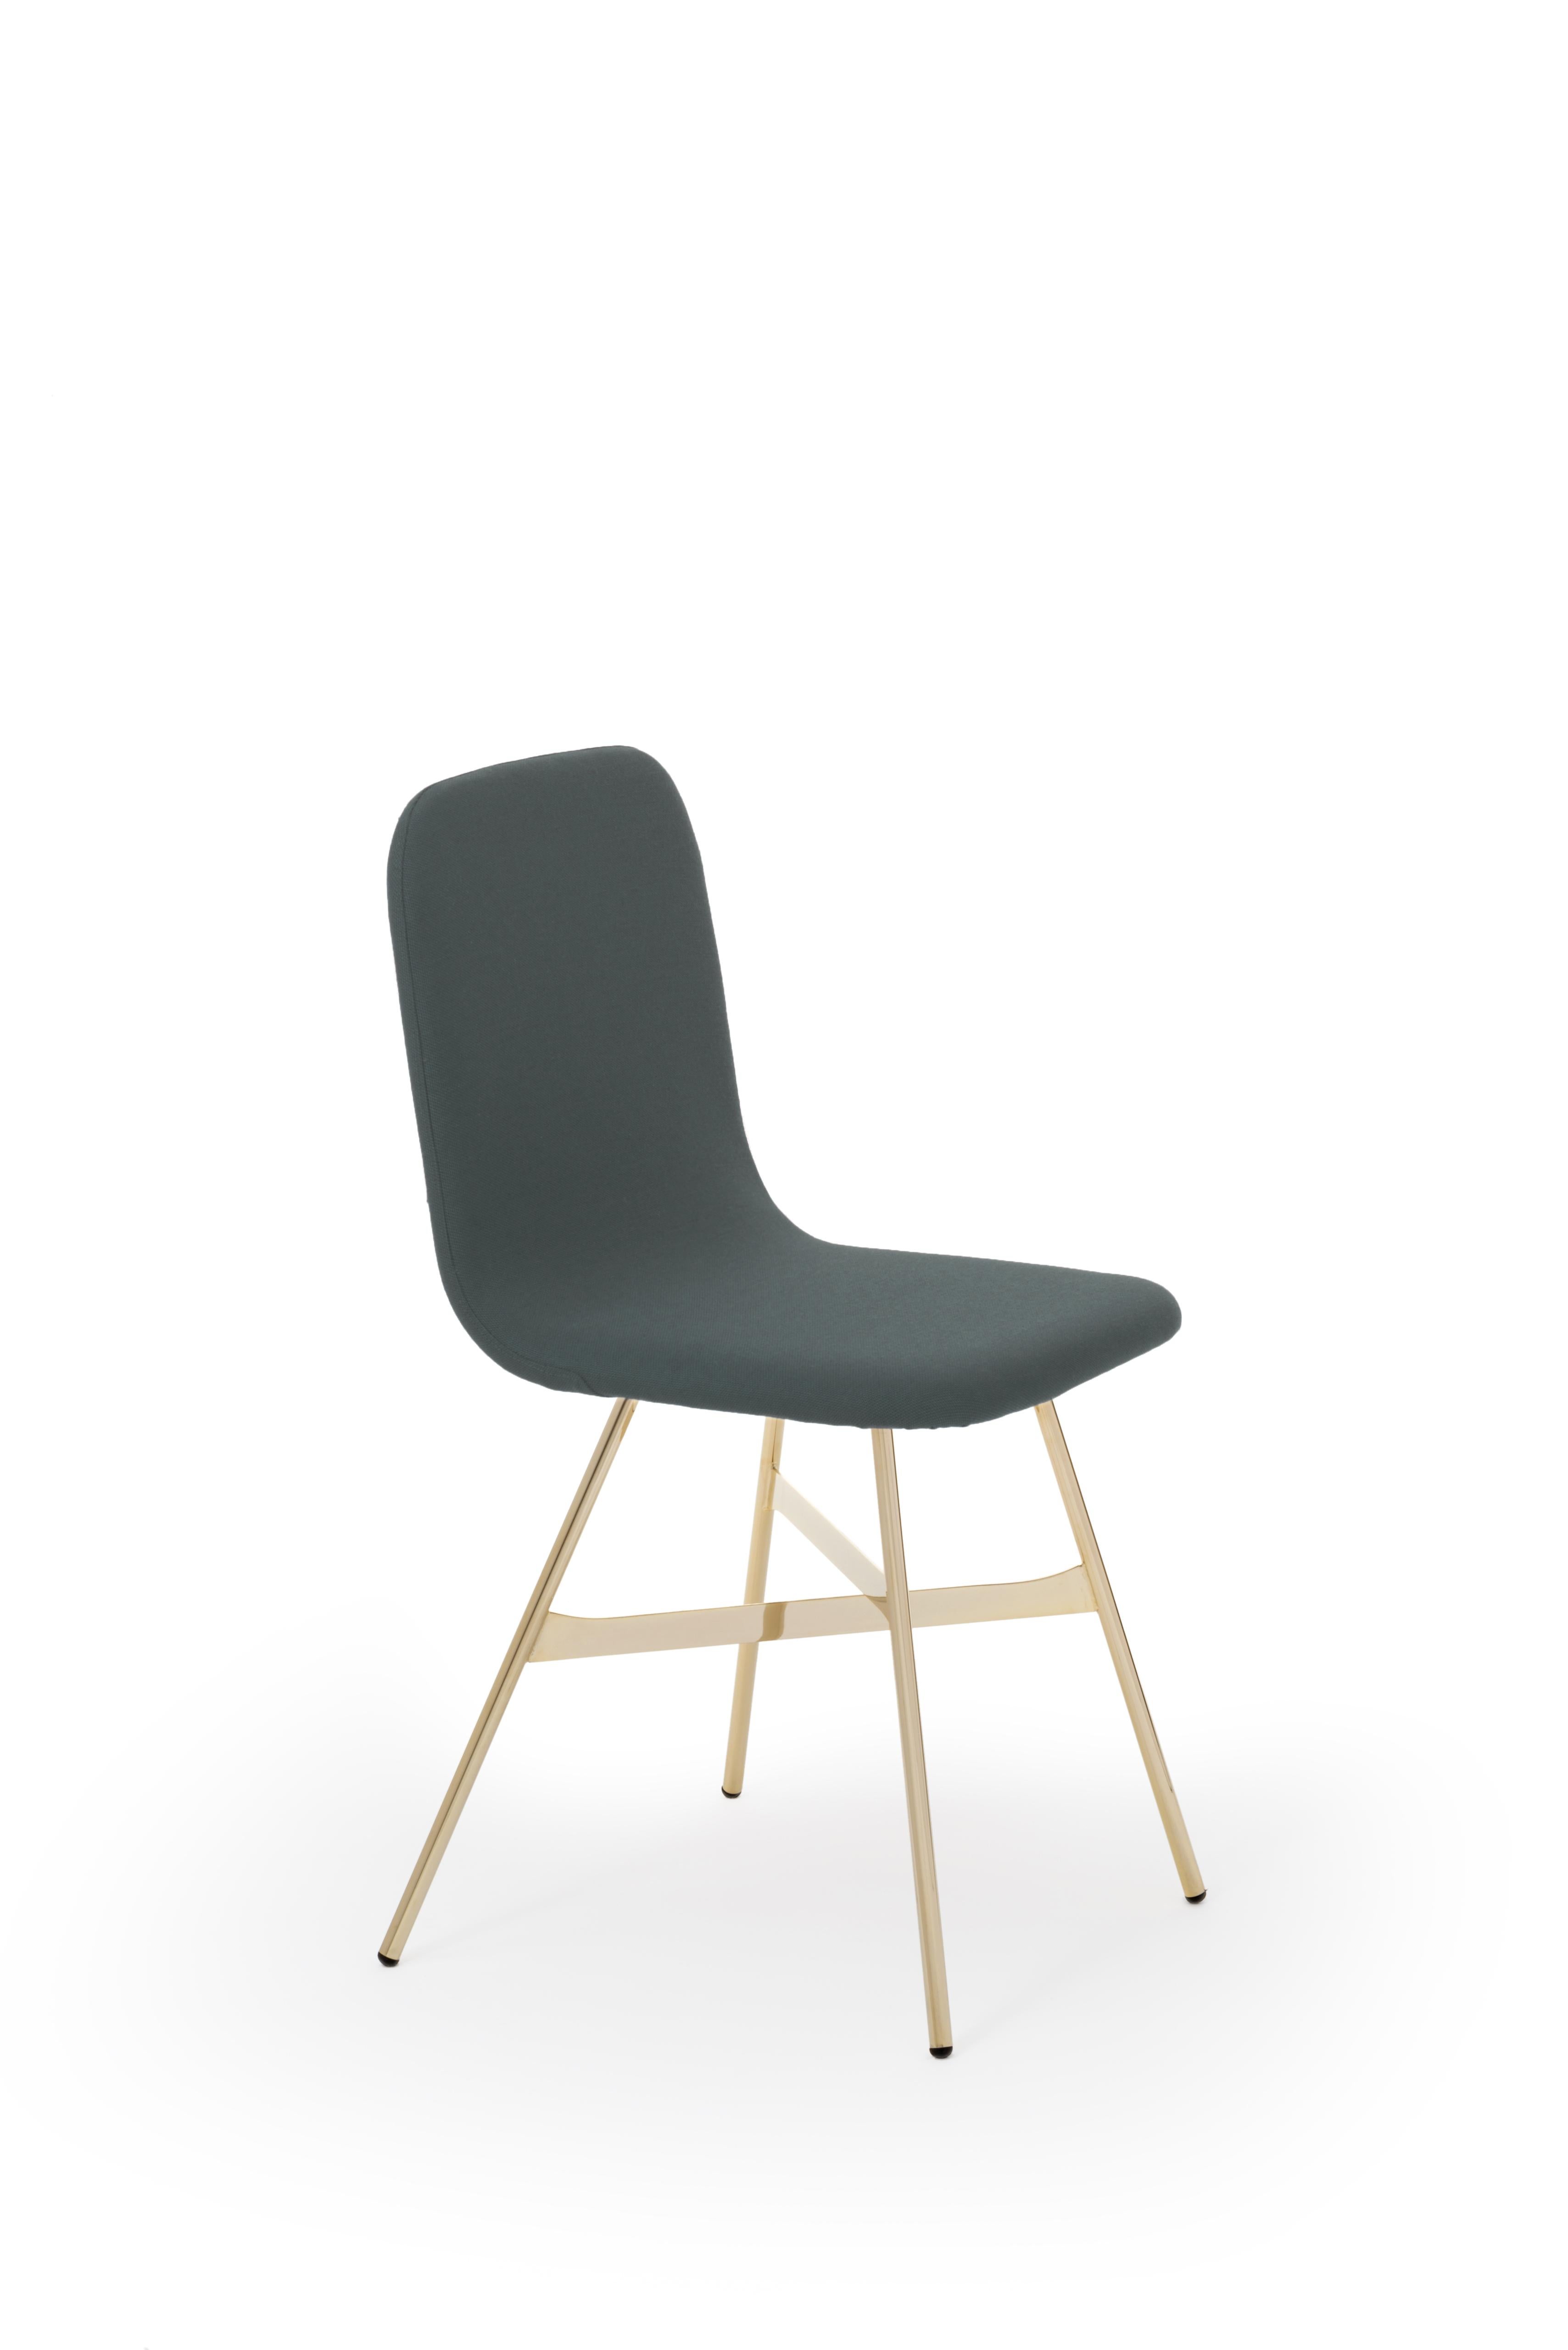 Minimalist Tria Simple Chair Golden Legs Upholstered in Mint Green Velvet Made in Italy For Sale